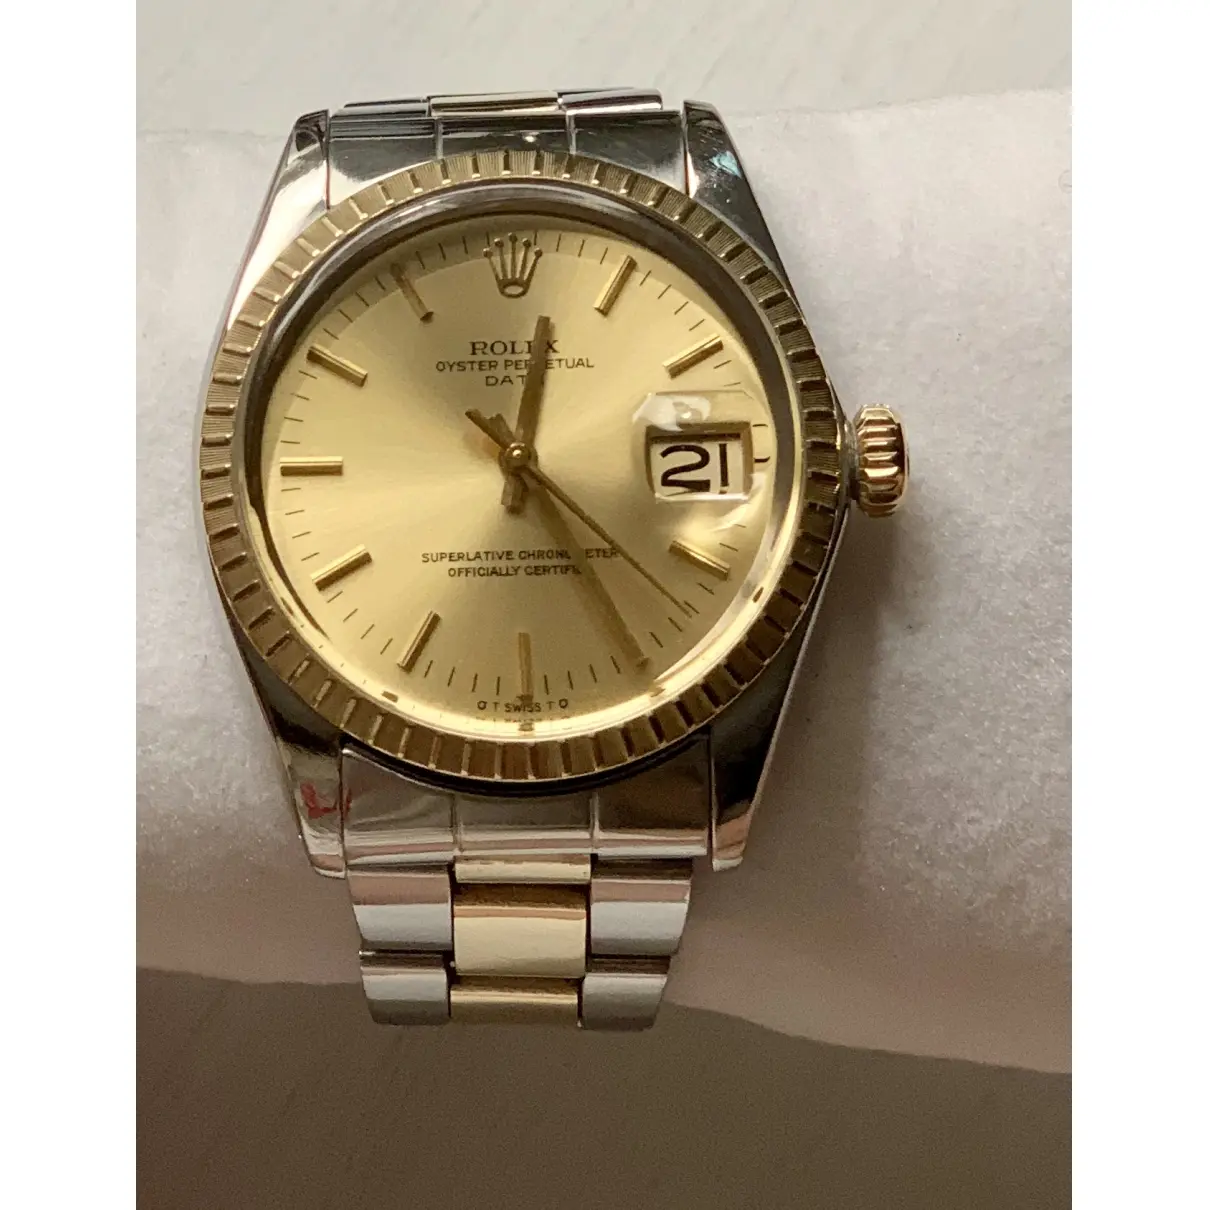 Rolex Oyster Perpetual 34mm watch for sale - Vintage